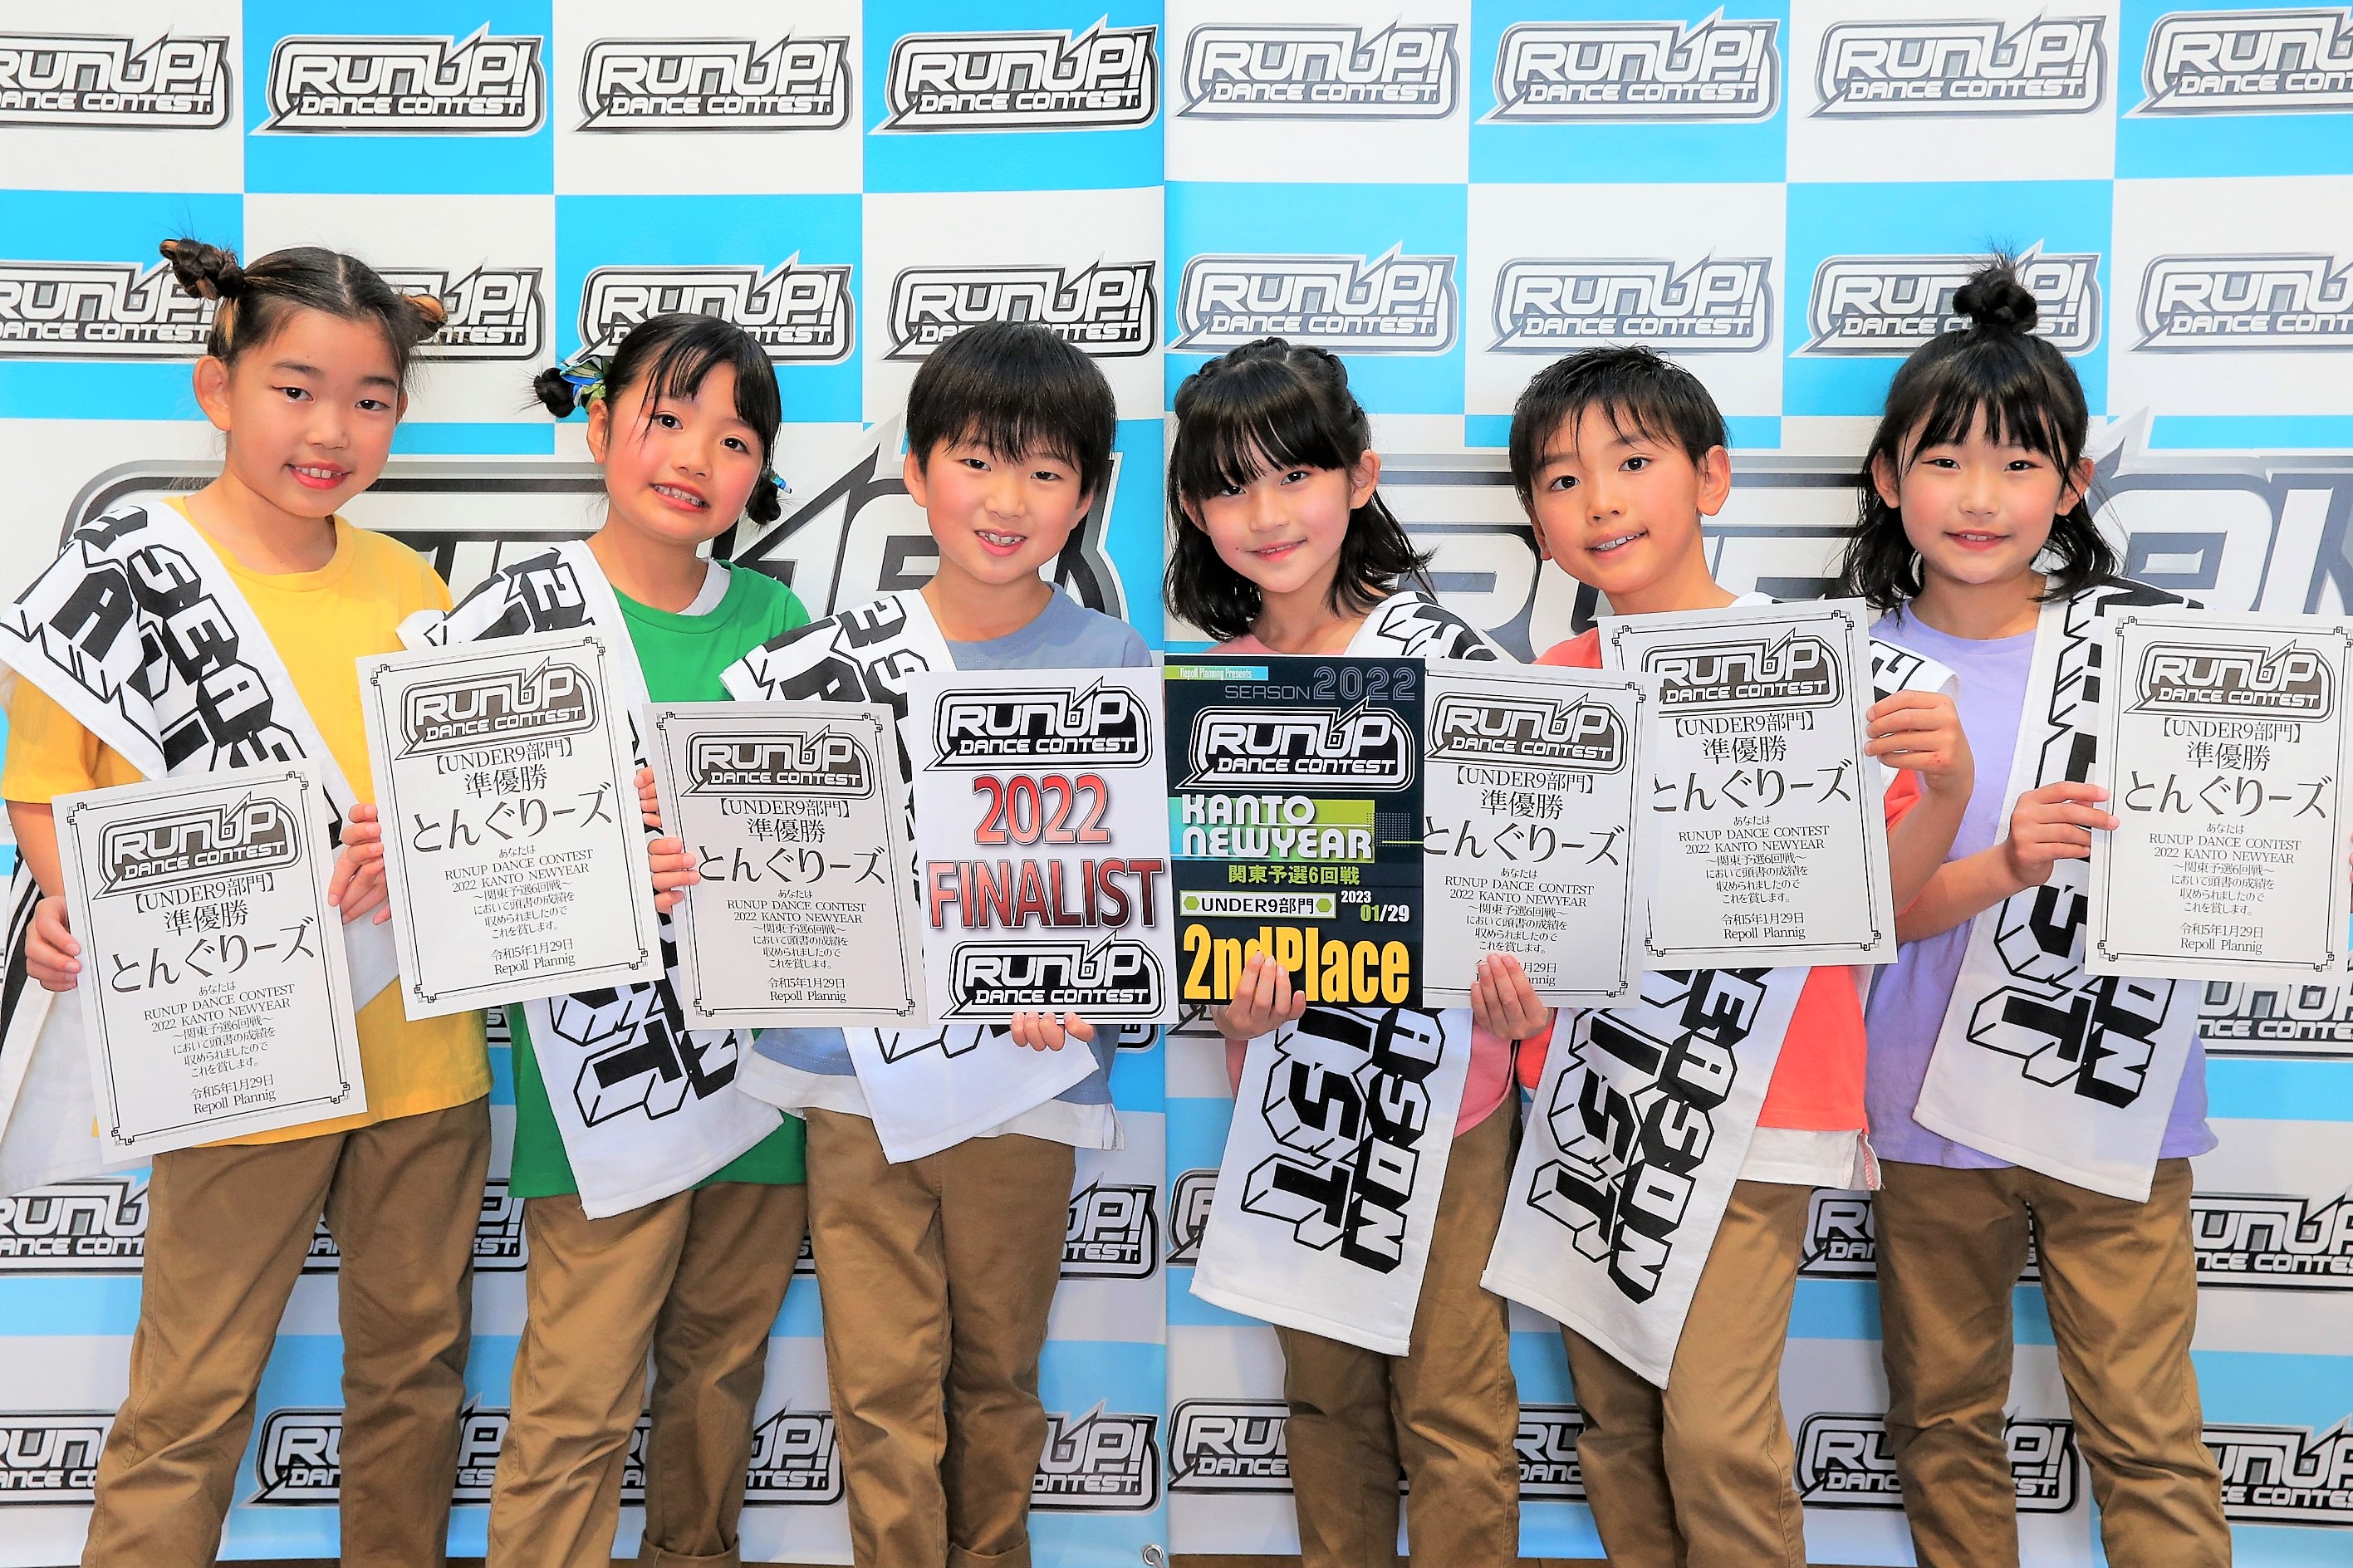 RUNUP 2022 KANTO NEWYEAR UNDER9 準優勝 とんぐりーズ